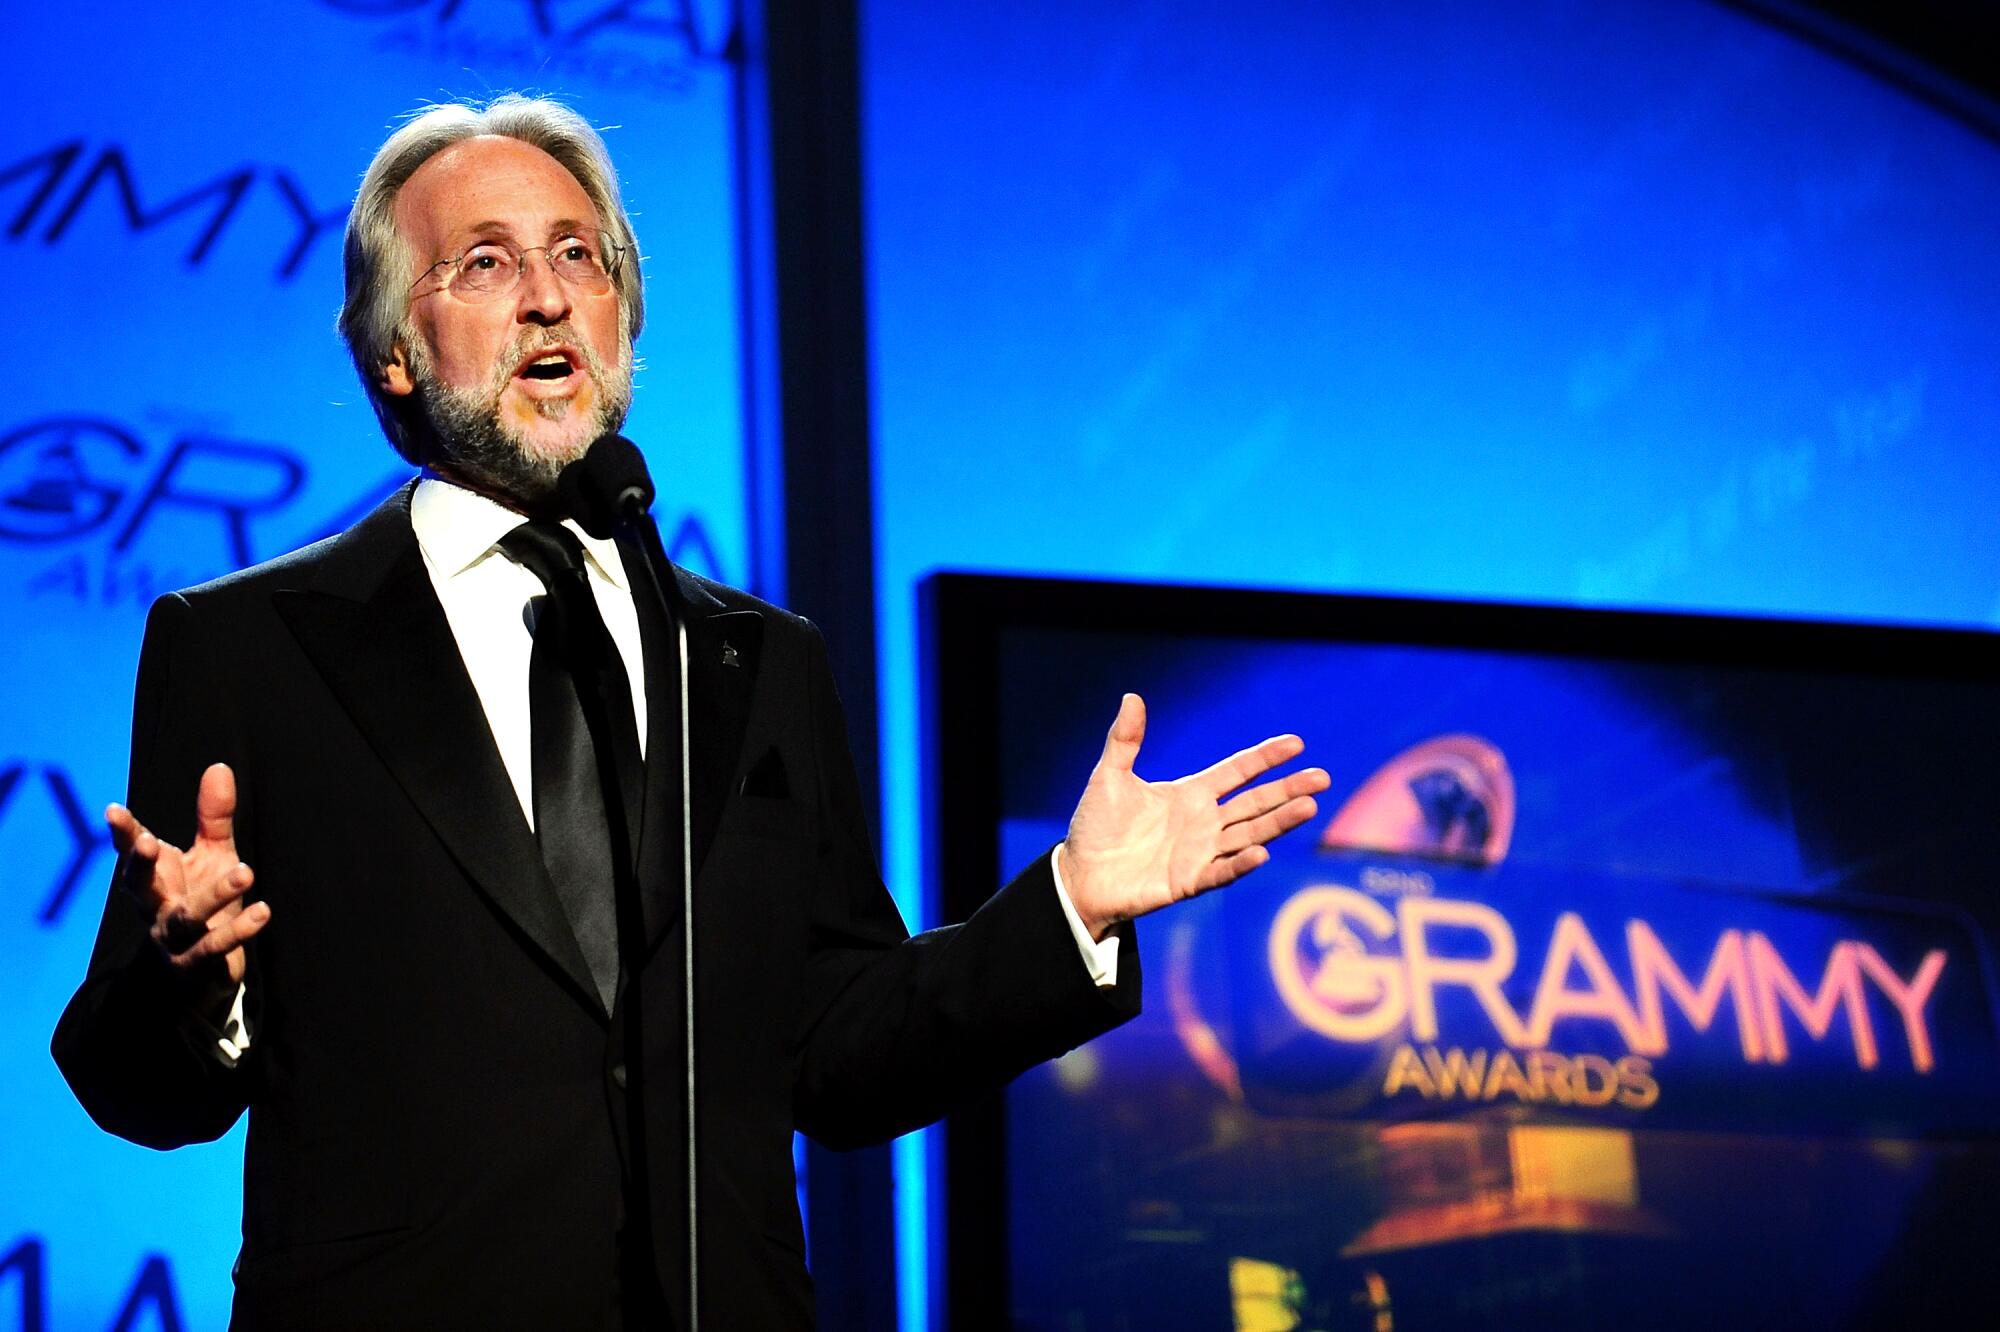 A bearded man in dark suit and tie stands at a mic and gestures. The words Grammy Awards are illuminated behind him.